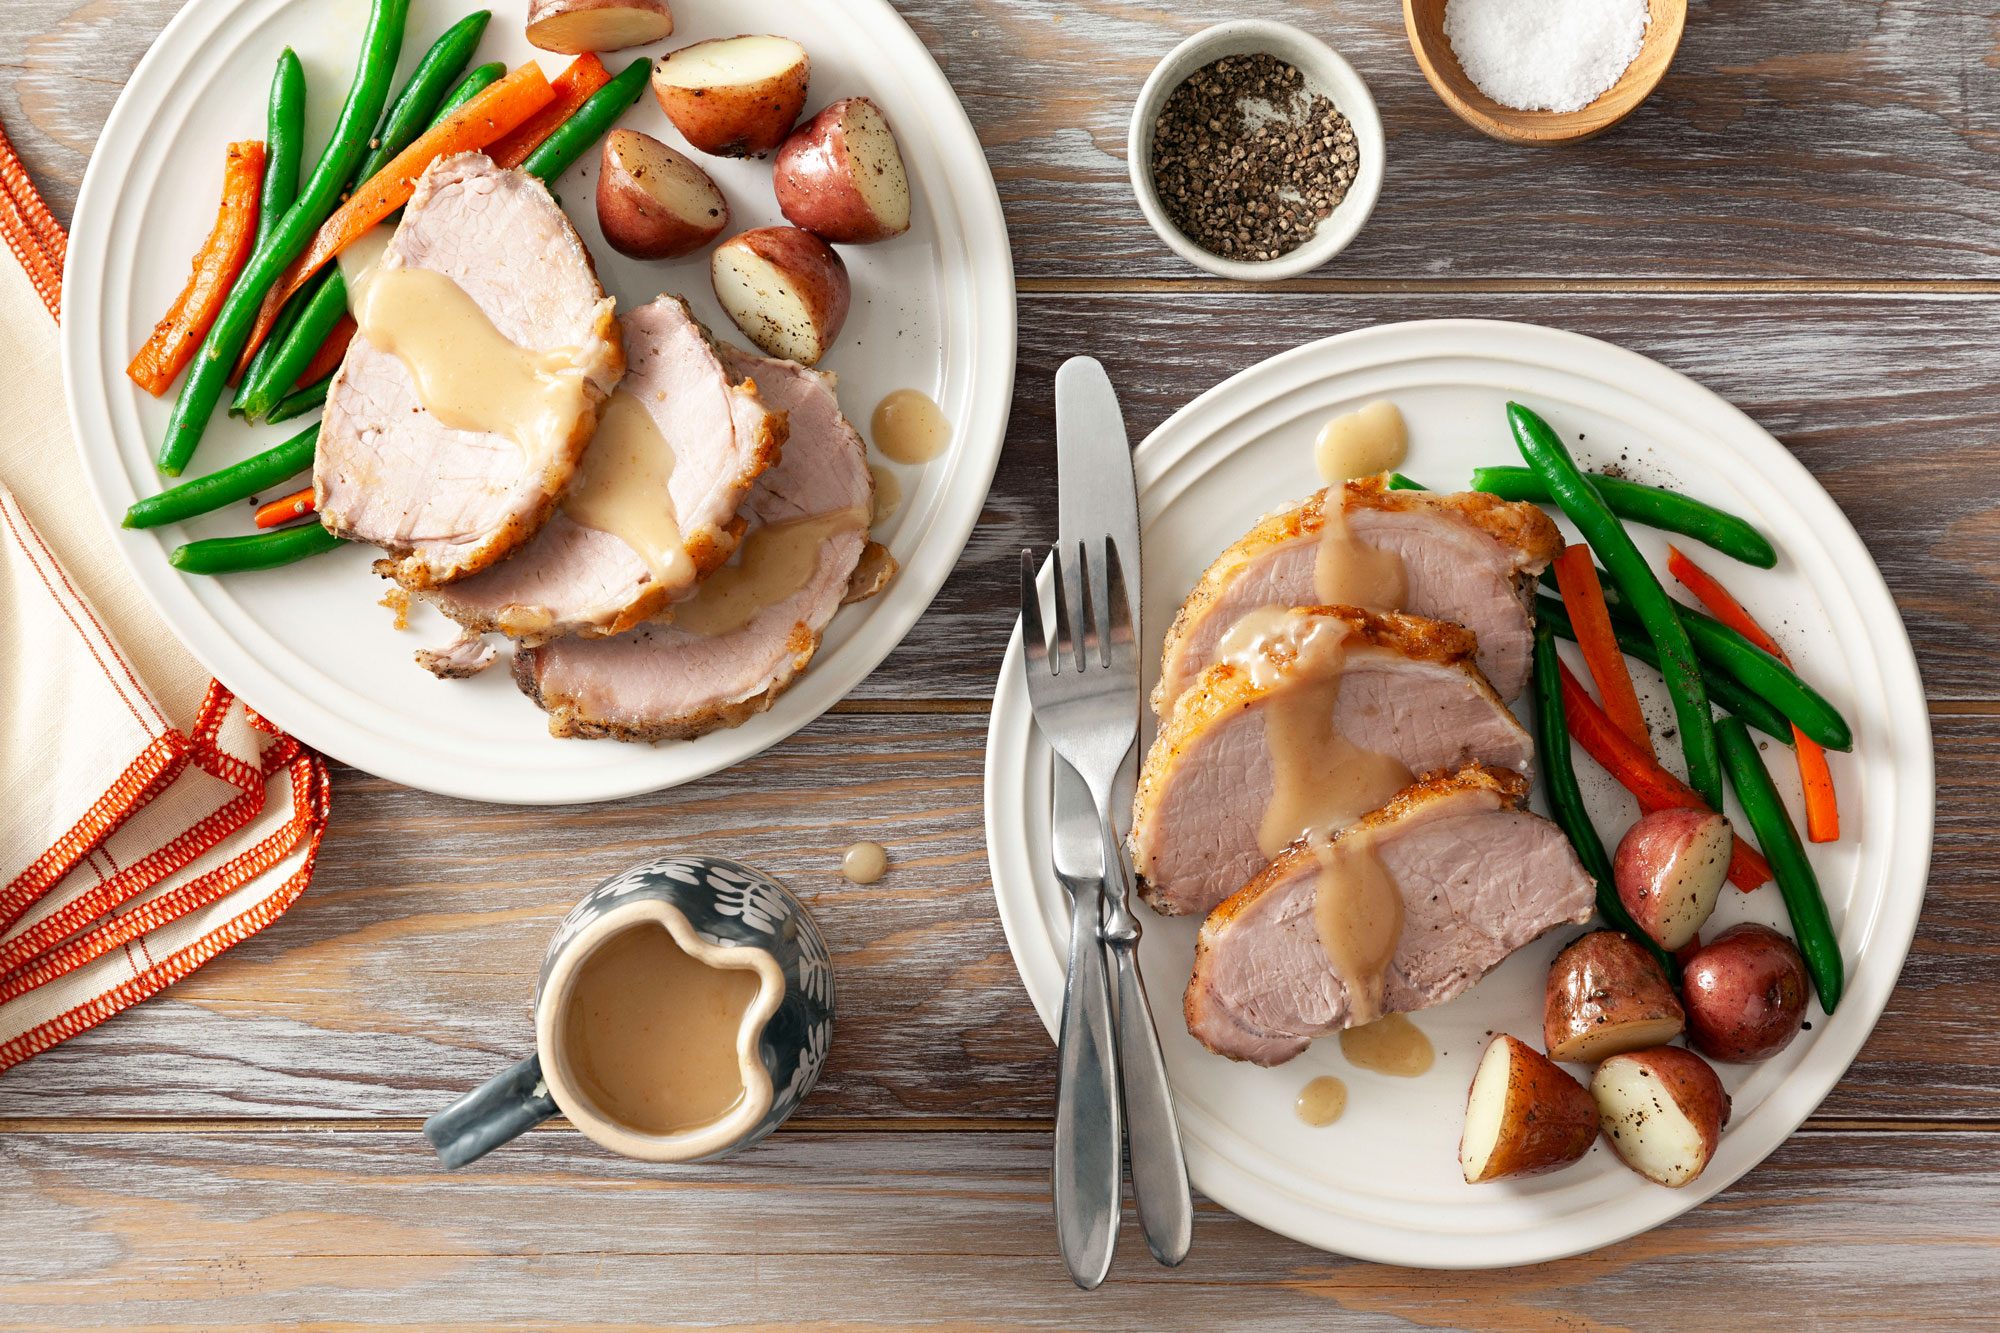 A tempting plate of pork roast, veggies, and gravy on a wooden table